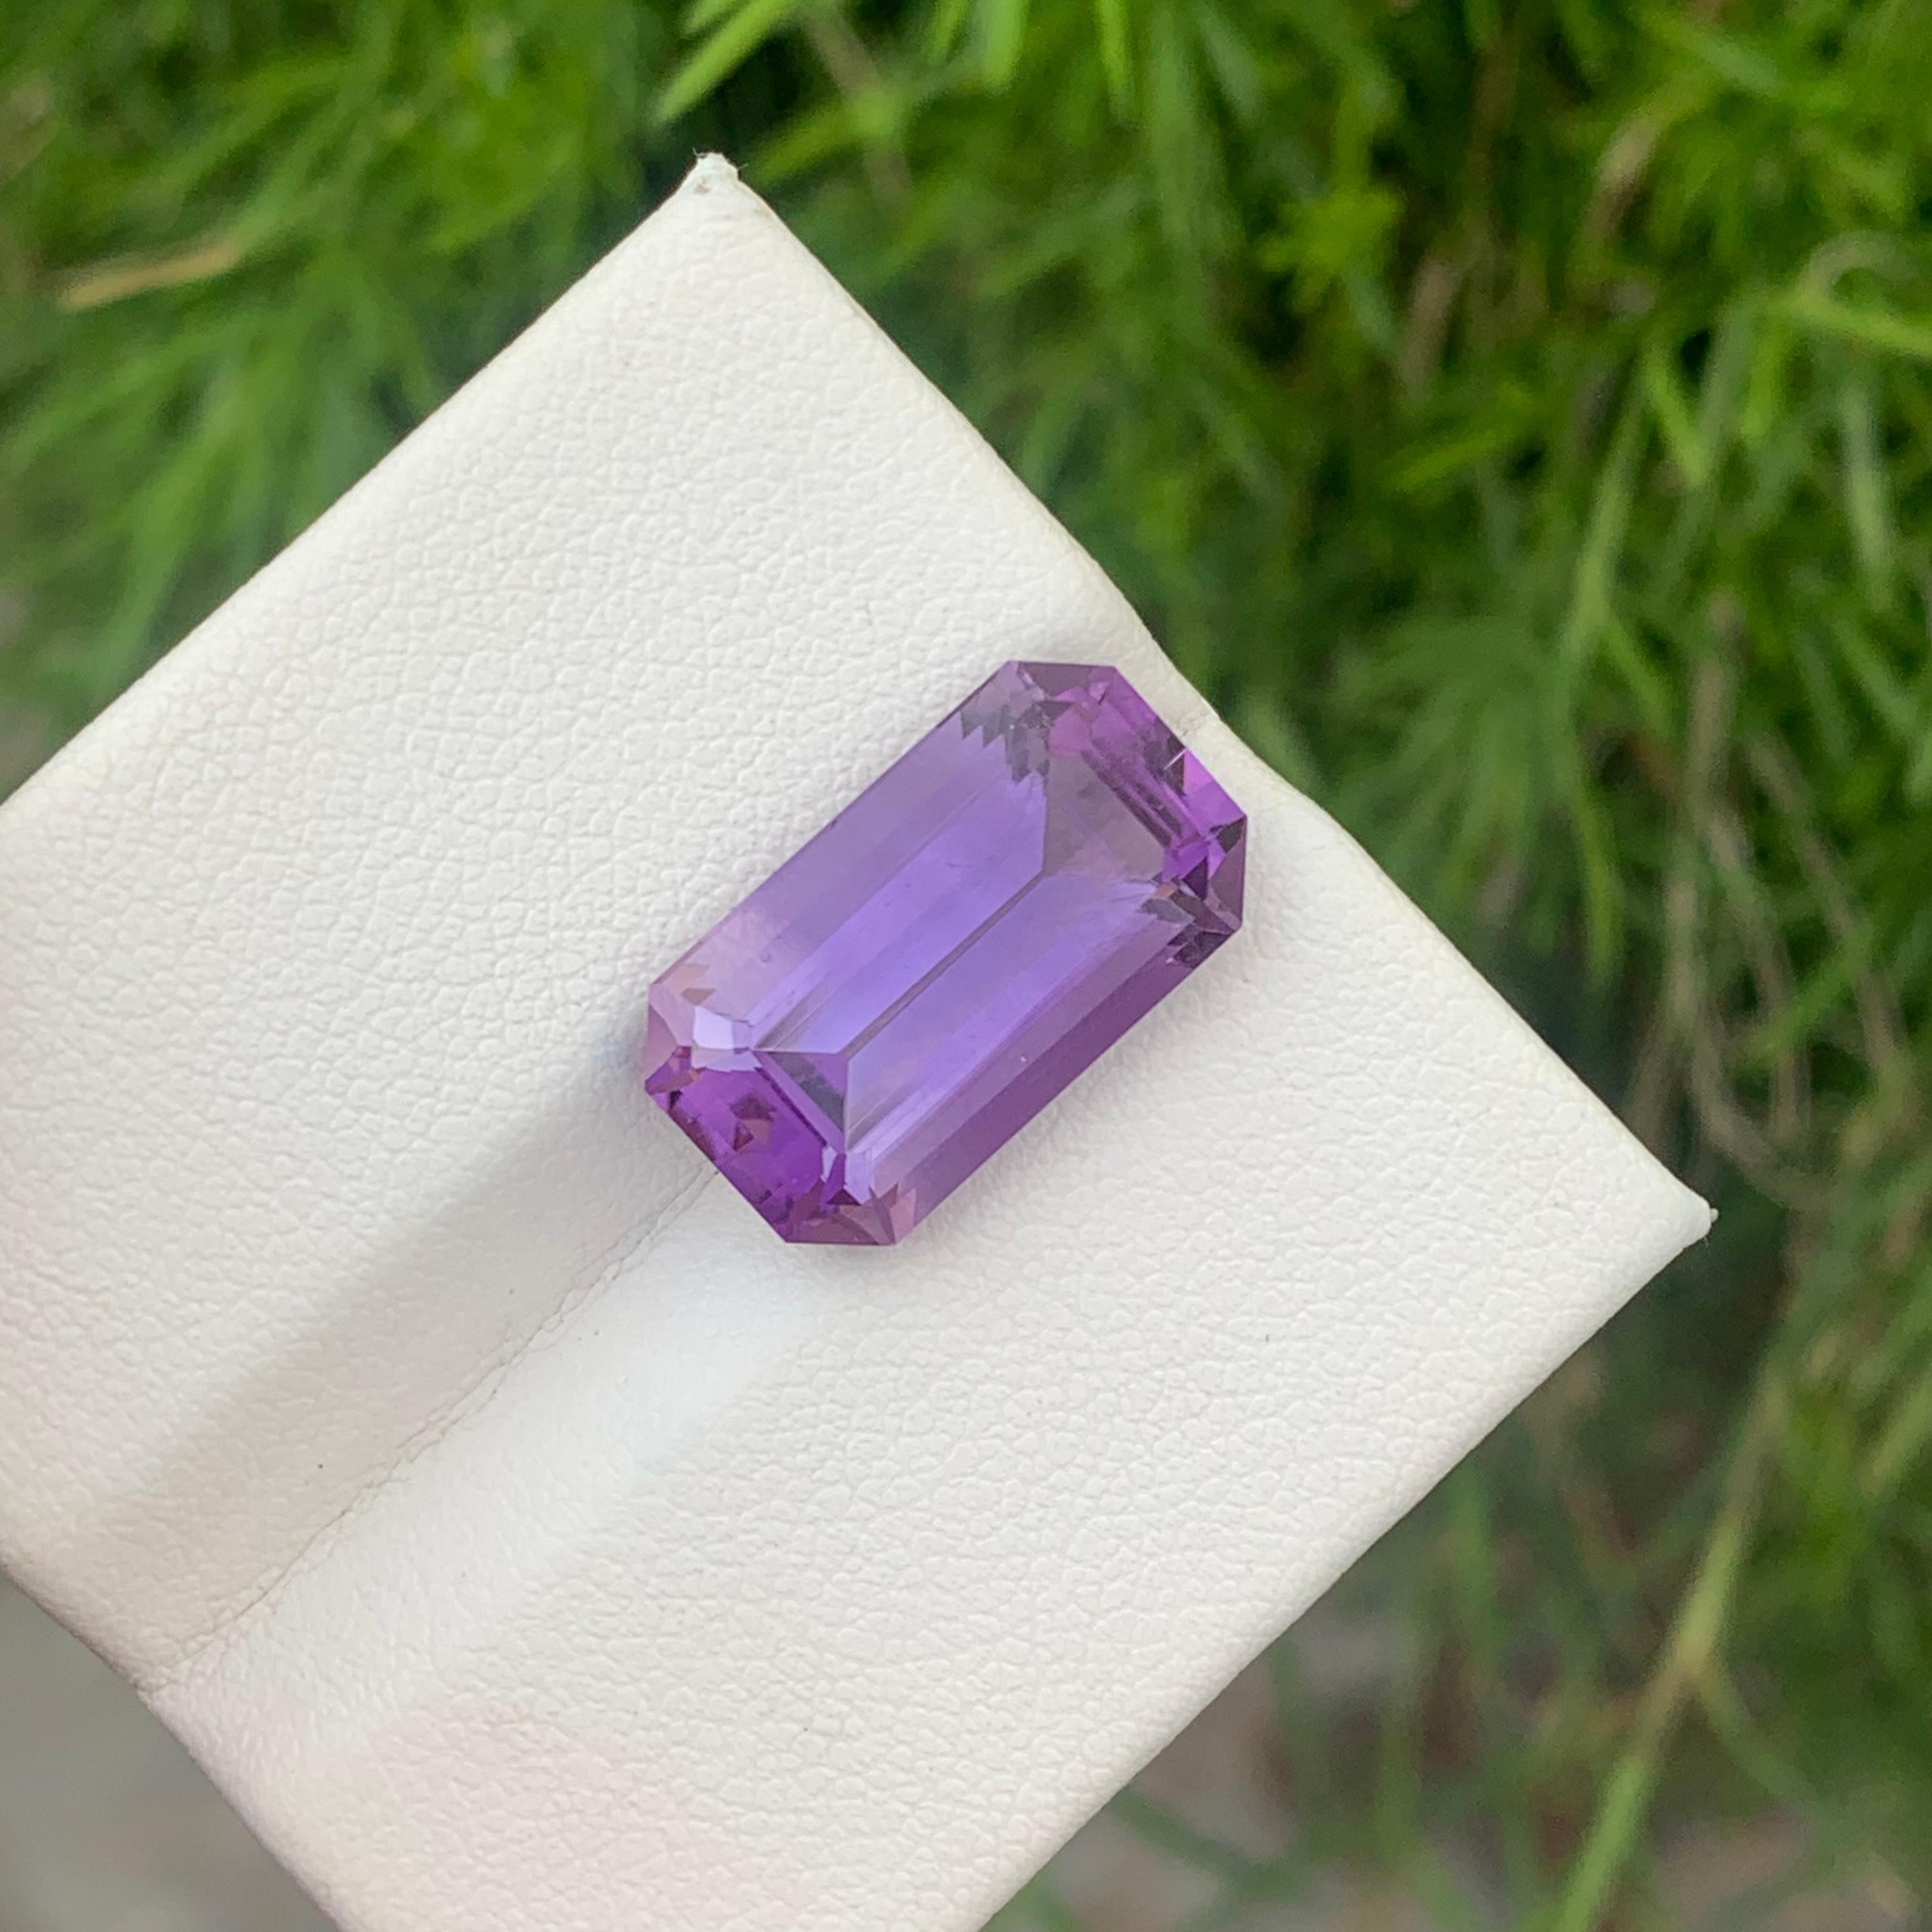 10.15 Carats Natural Loose Purple Amethyst Gem For Jewelry Making Emerald Shape For Sale 7